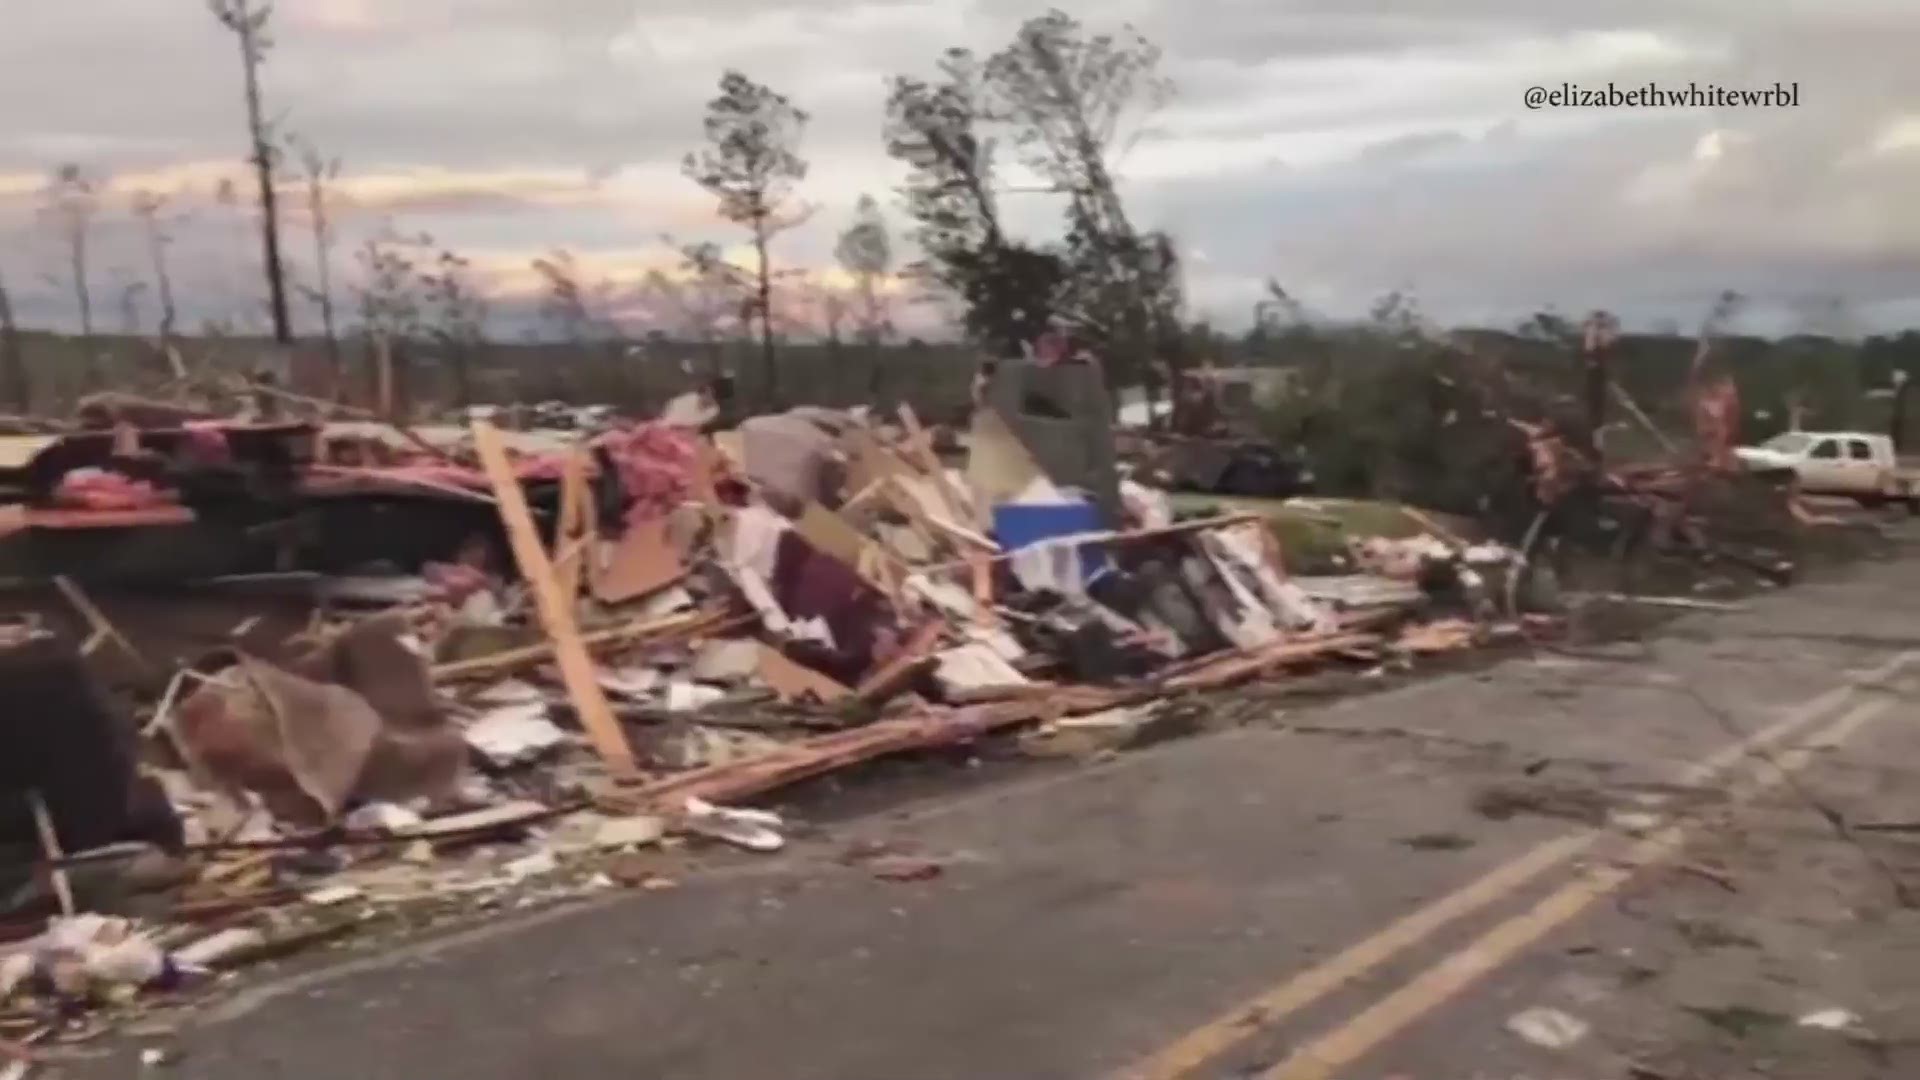 Video showing the damage caused by a tornado in Lee County, Alabama on March 3, 2019. Over a dozen people were reported dead in that area from the damage caused by the tornado.